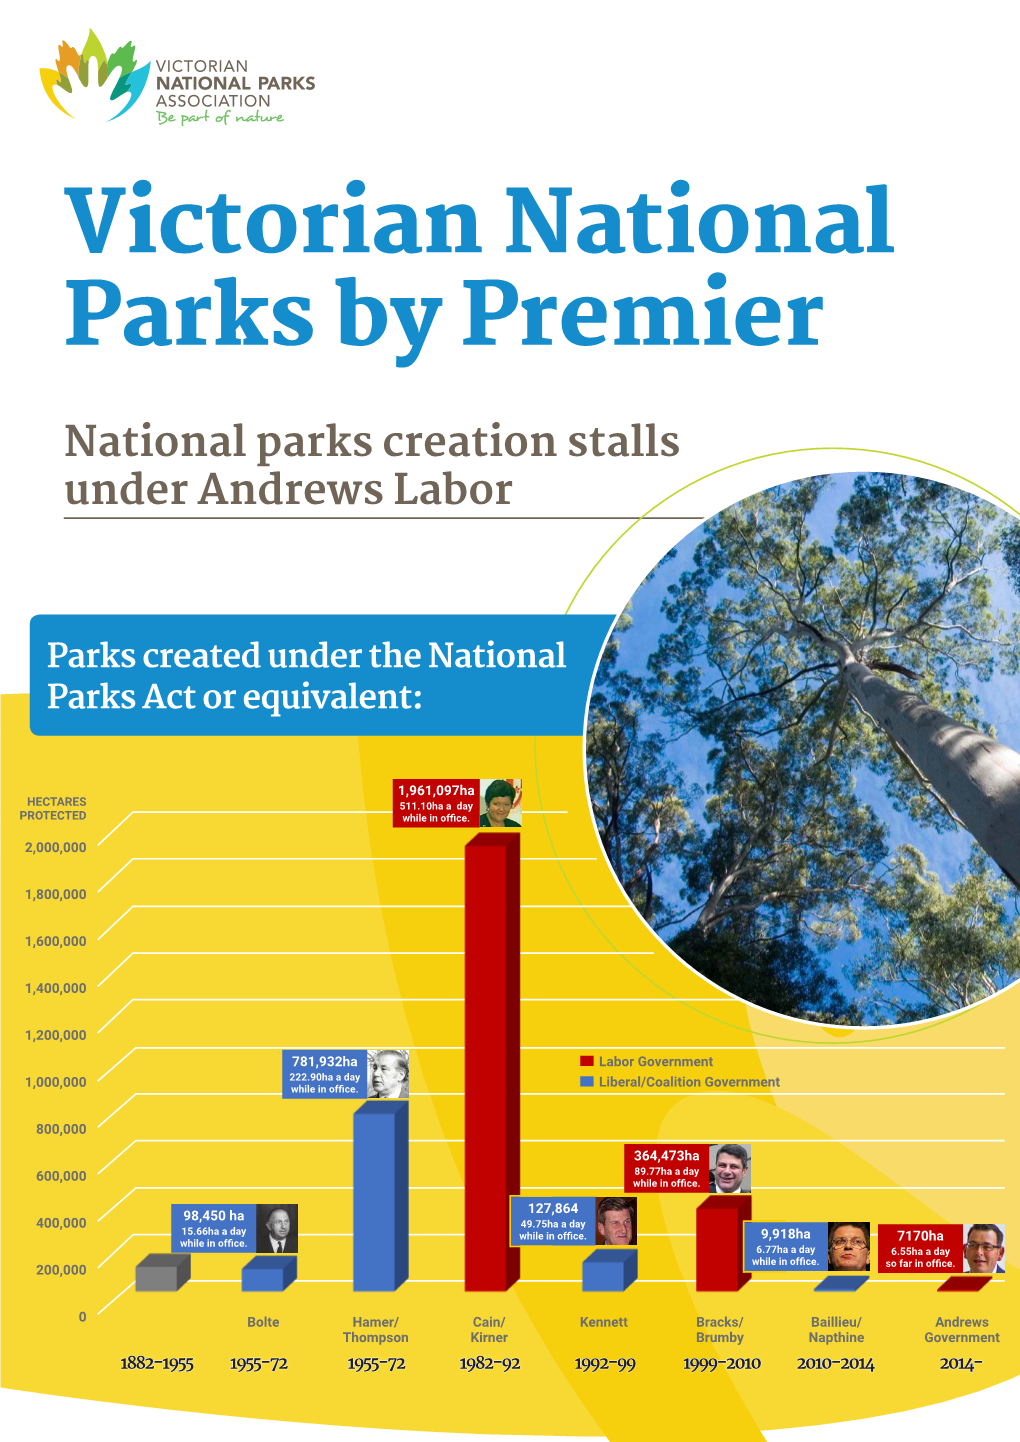 Victorian National Parks by Premier